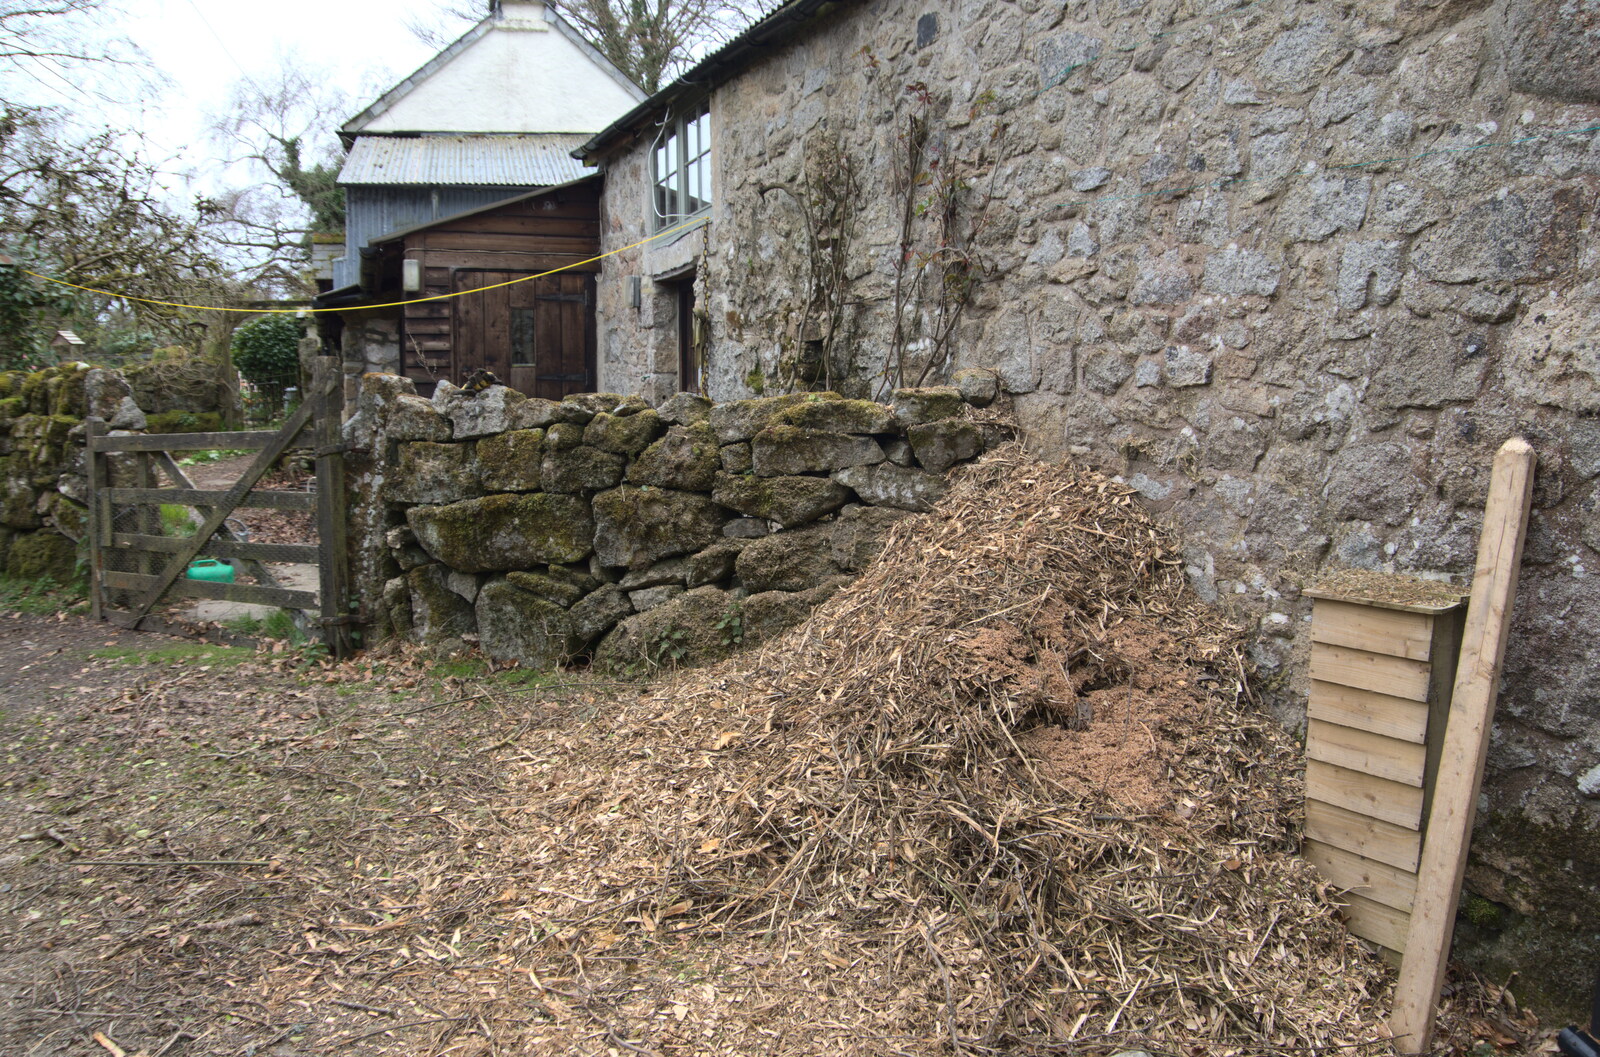 A pile of animal bedding by a cottage from Easter in South Zeal and Moretonhampstead, Devon - 9th April